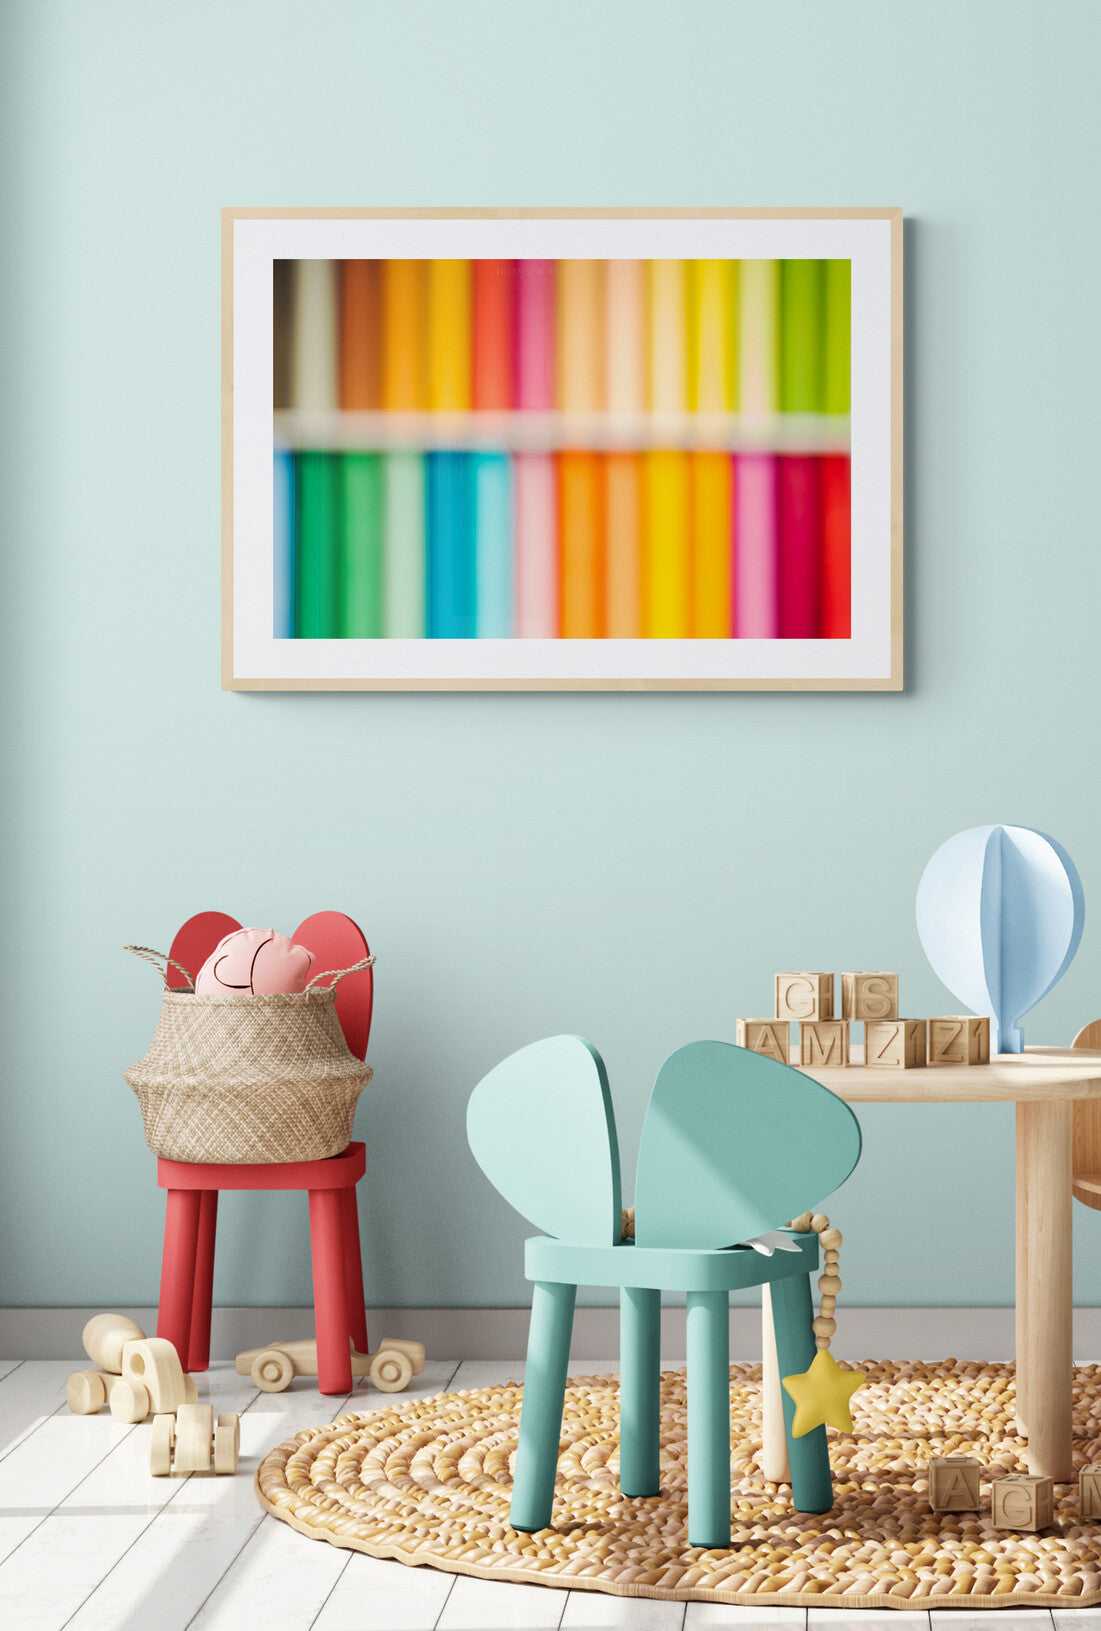 Colorful Abstract Photograph of Colors of the Rainbow in a Playroom as inspirational Wall art